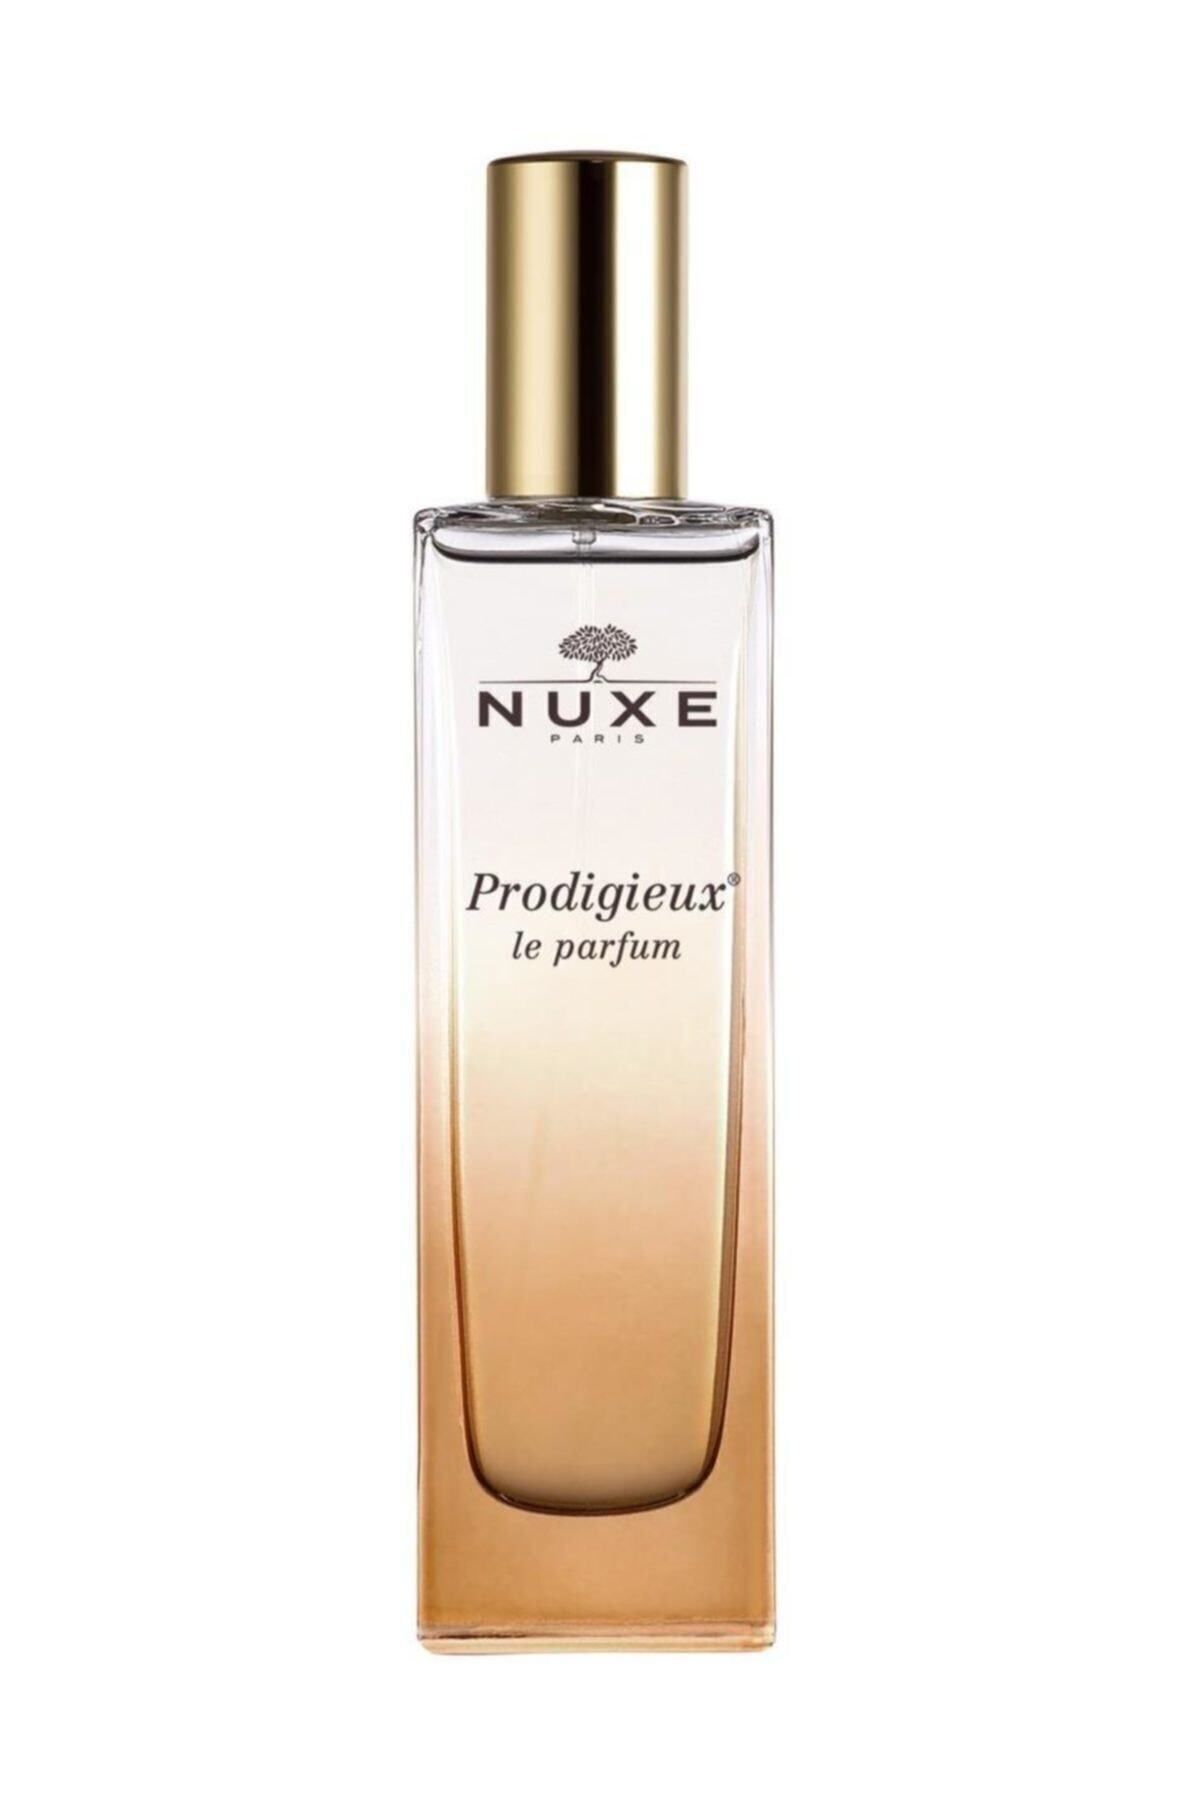 Nuxe NATURAL FLOWER SCENTED EDP İNTENSE SCENT WOMEN'S PERFUME 50 ML DEMBA3412